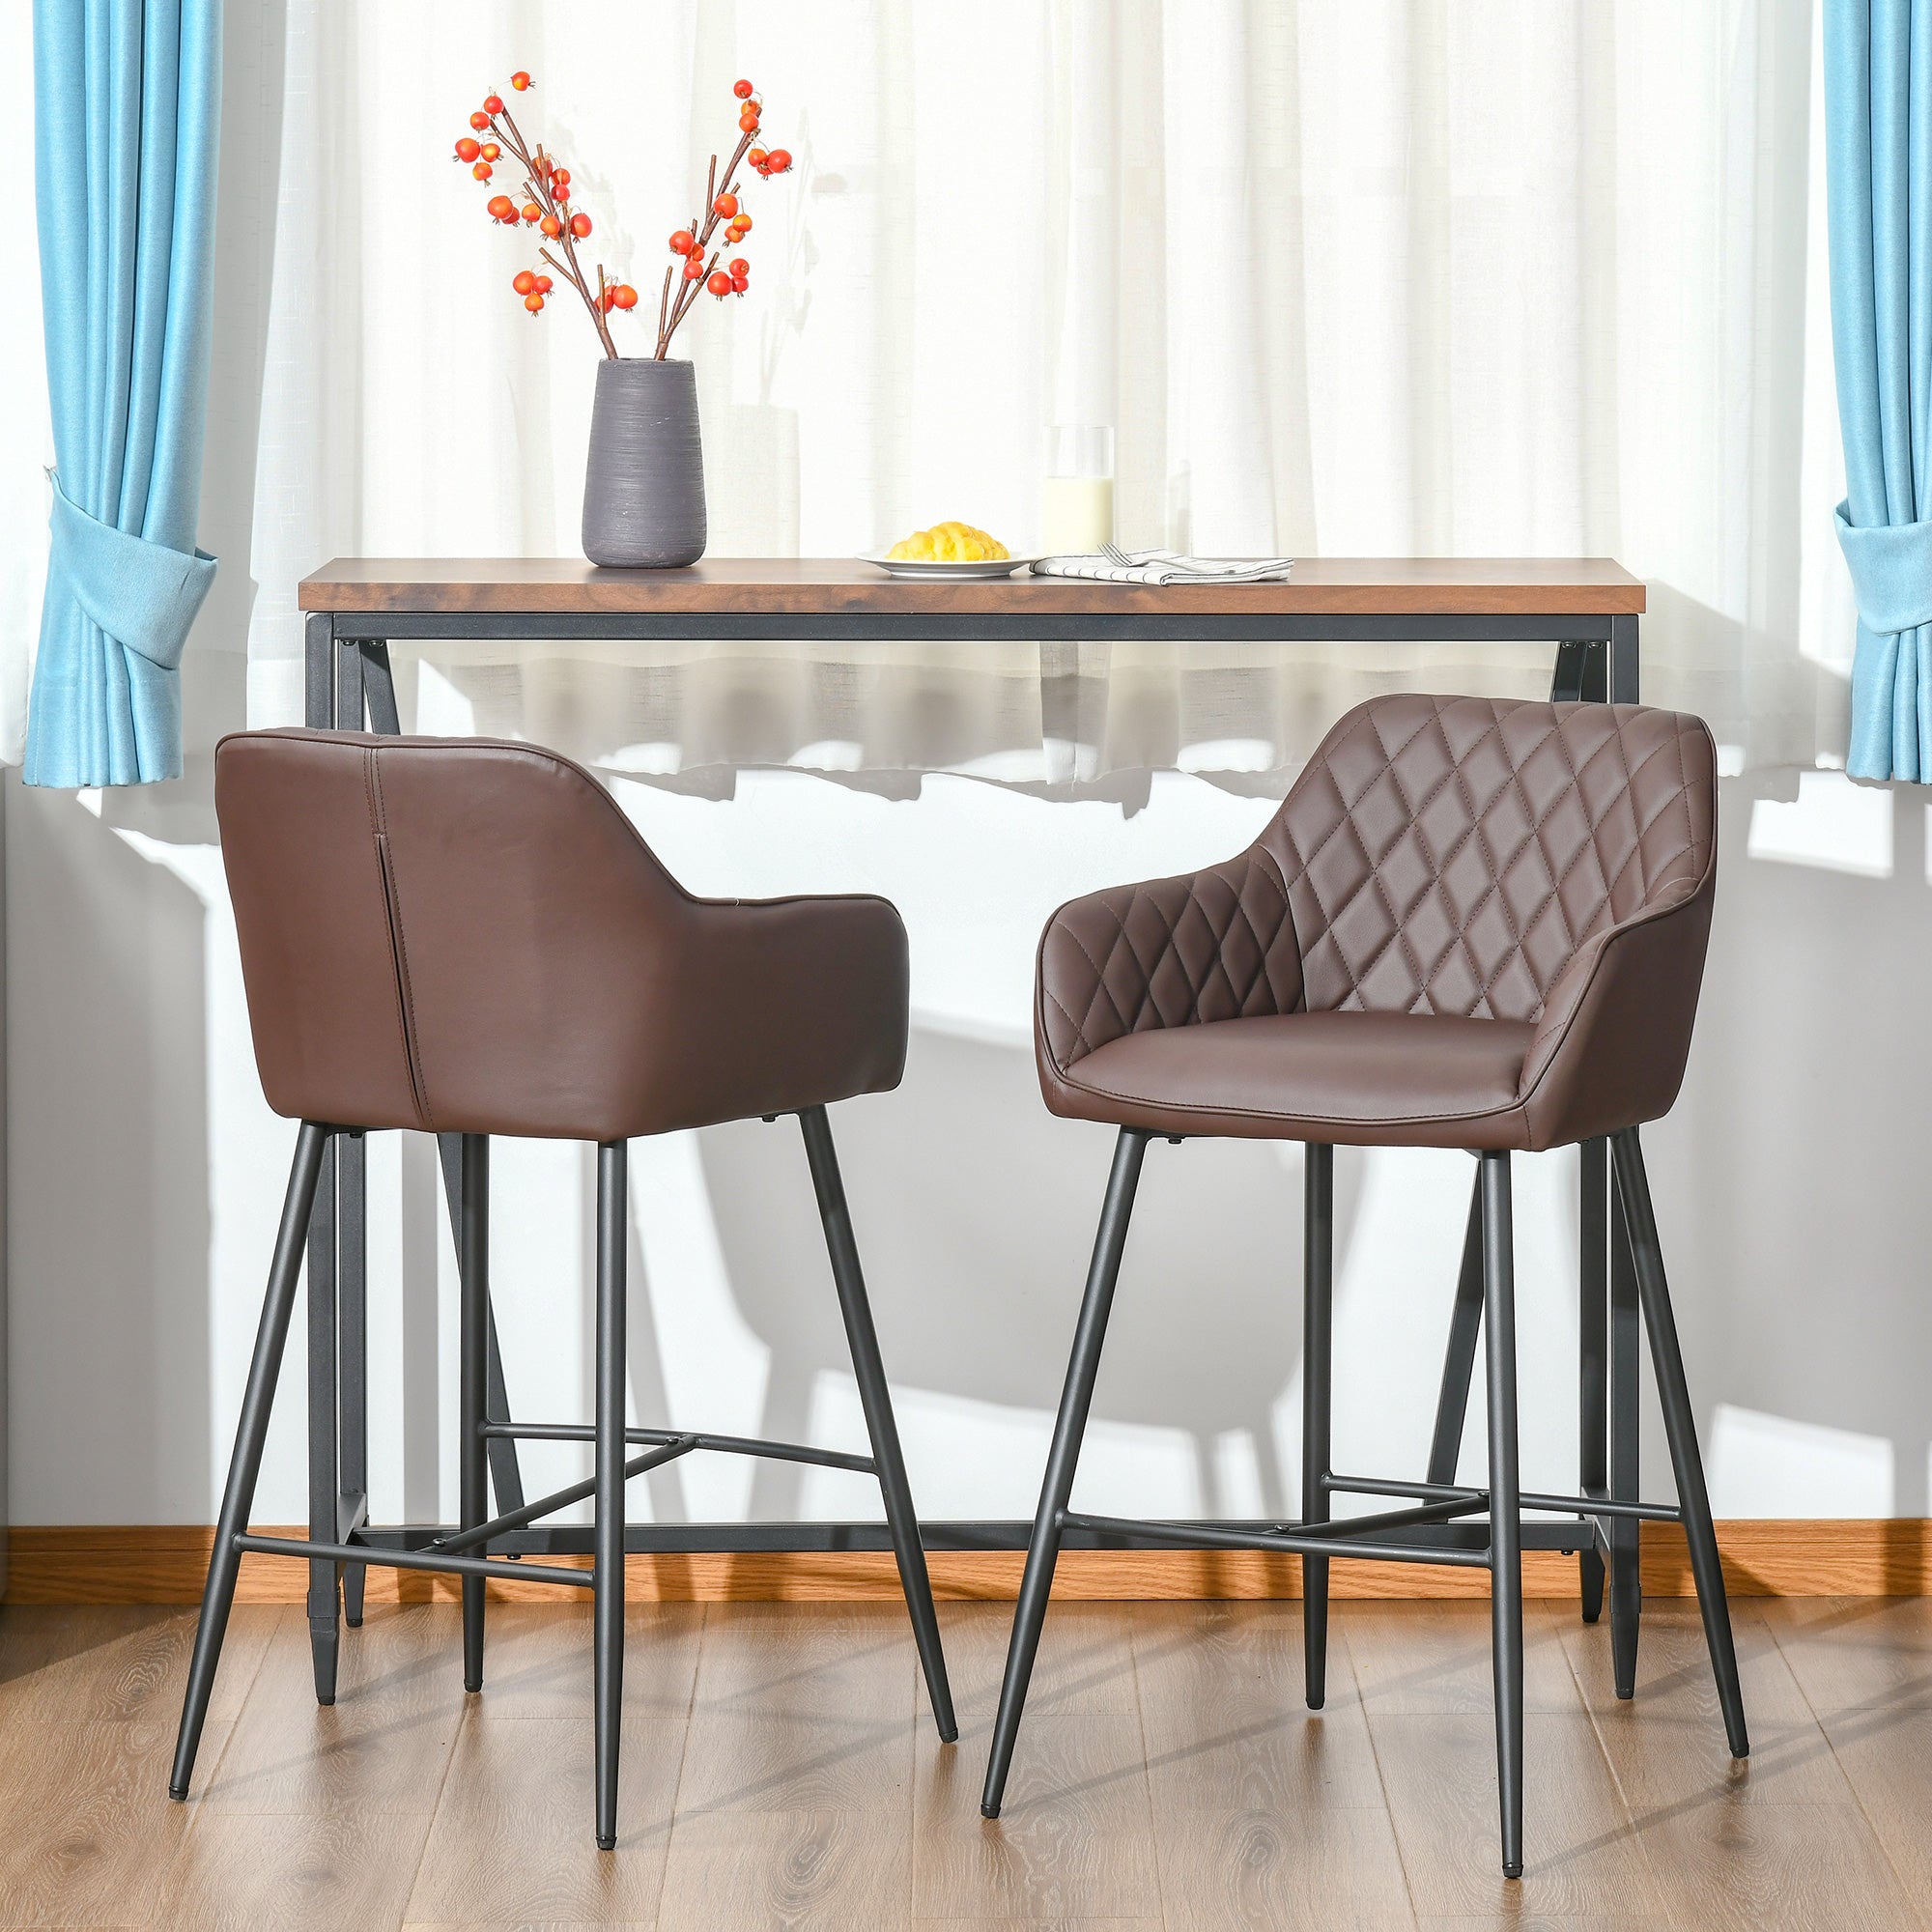 Set of 2 Bar stools With Backs Retro PU Leather Bar Chairs w/ Footrest Metal Frame Comfort Support Stylish Dining Seating Home Brown  AOSOM   